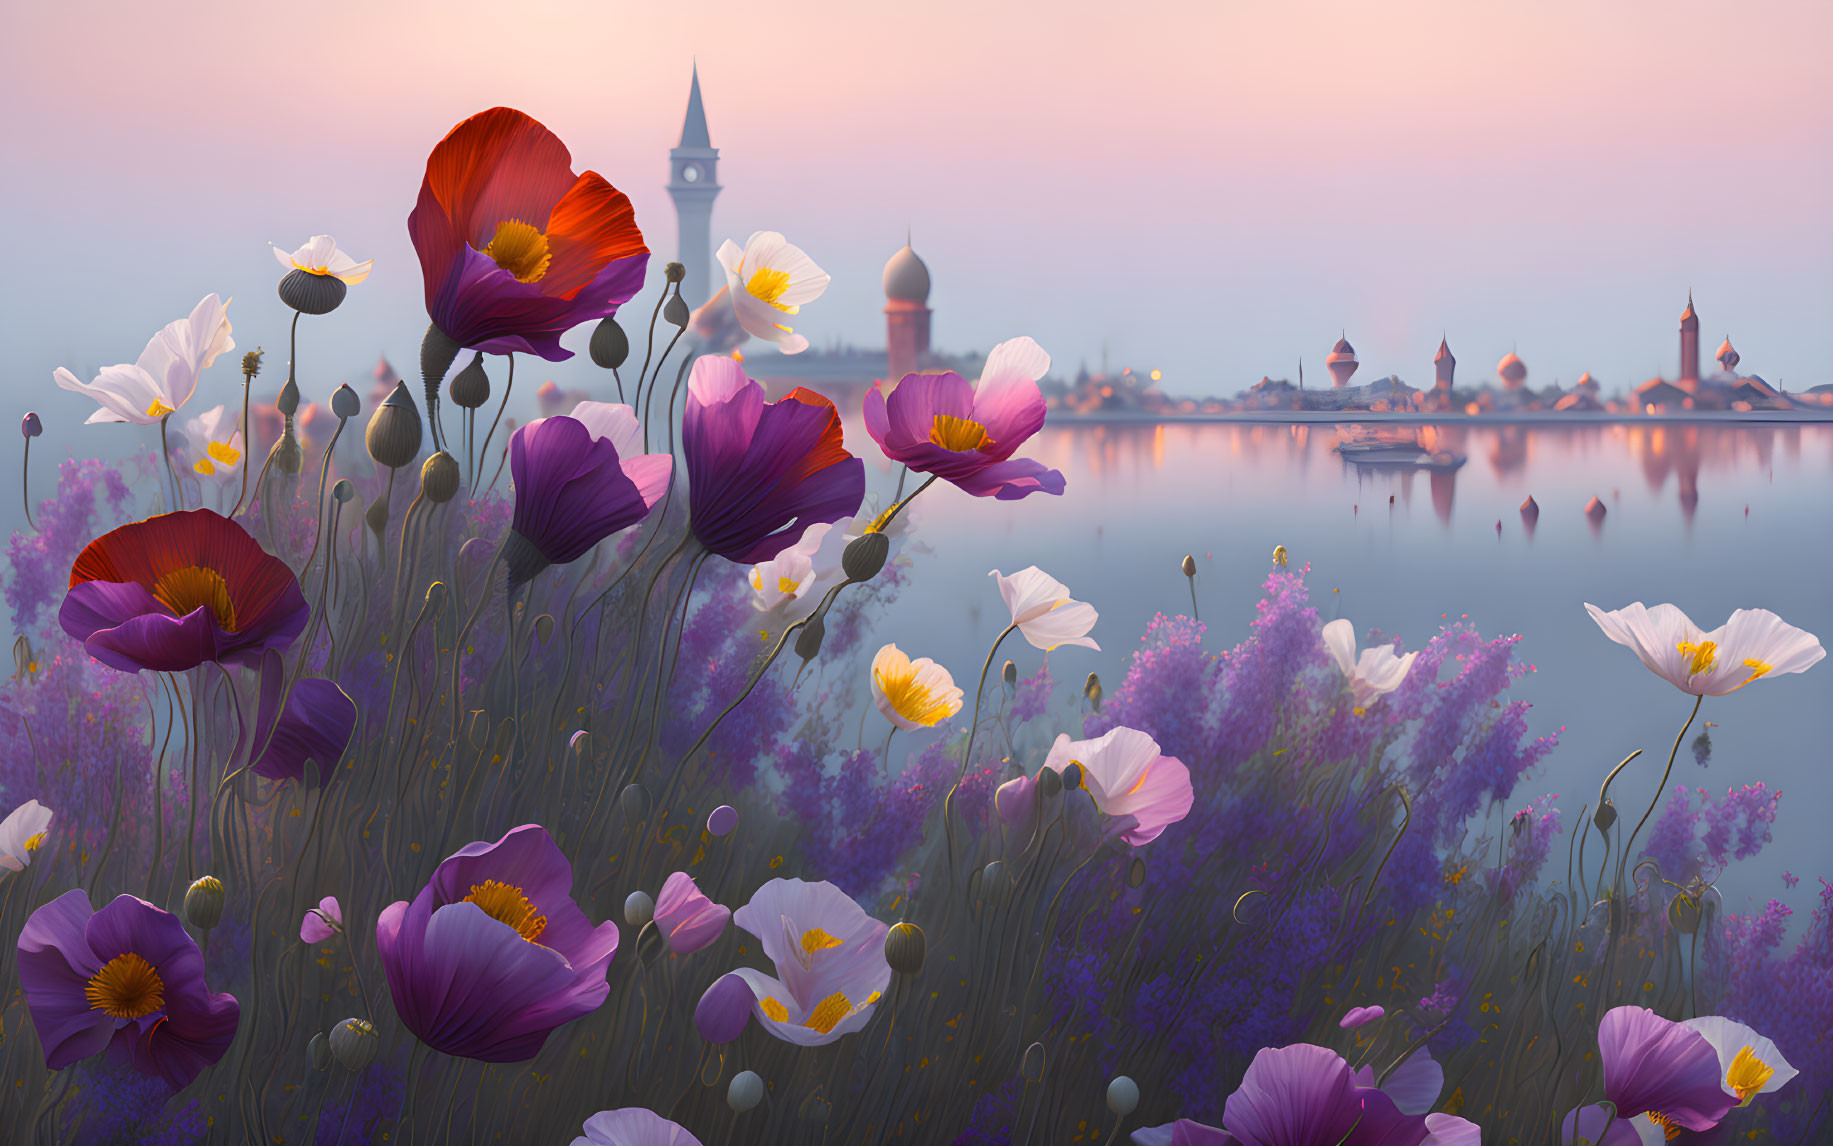 Tranquil dusk landscape with vibrant flowers and distant buildings.